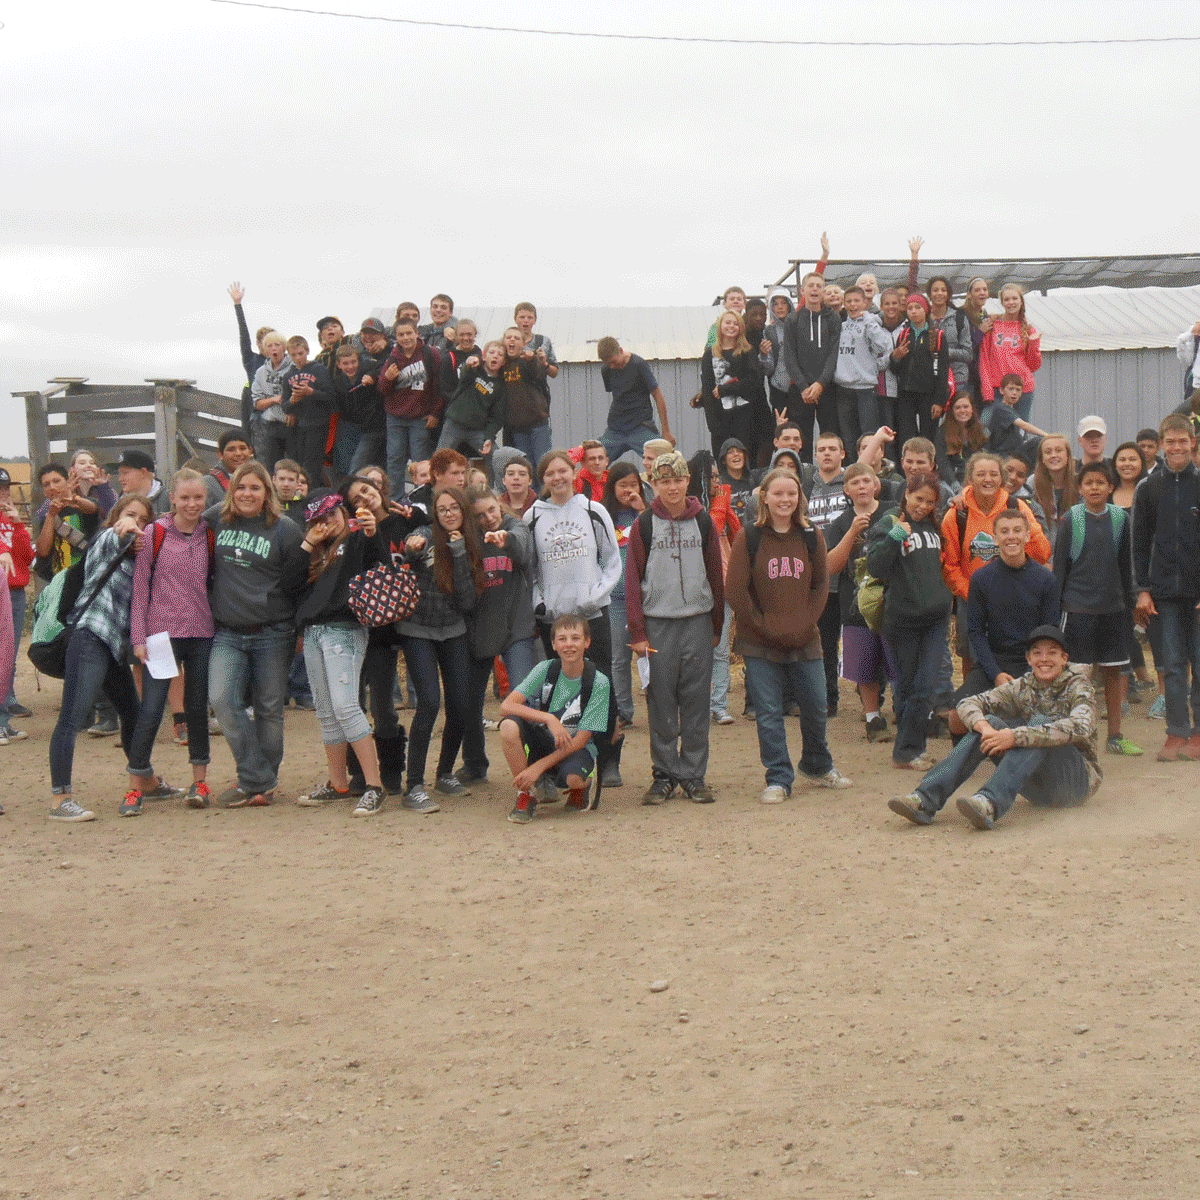 group photo of students on dairy farm